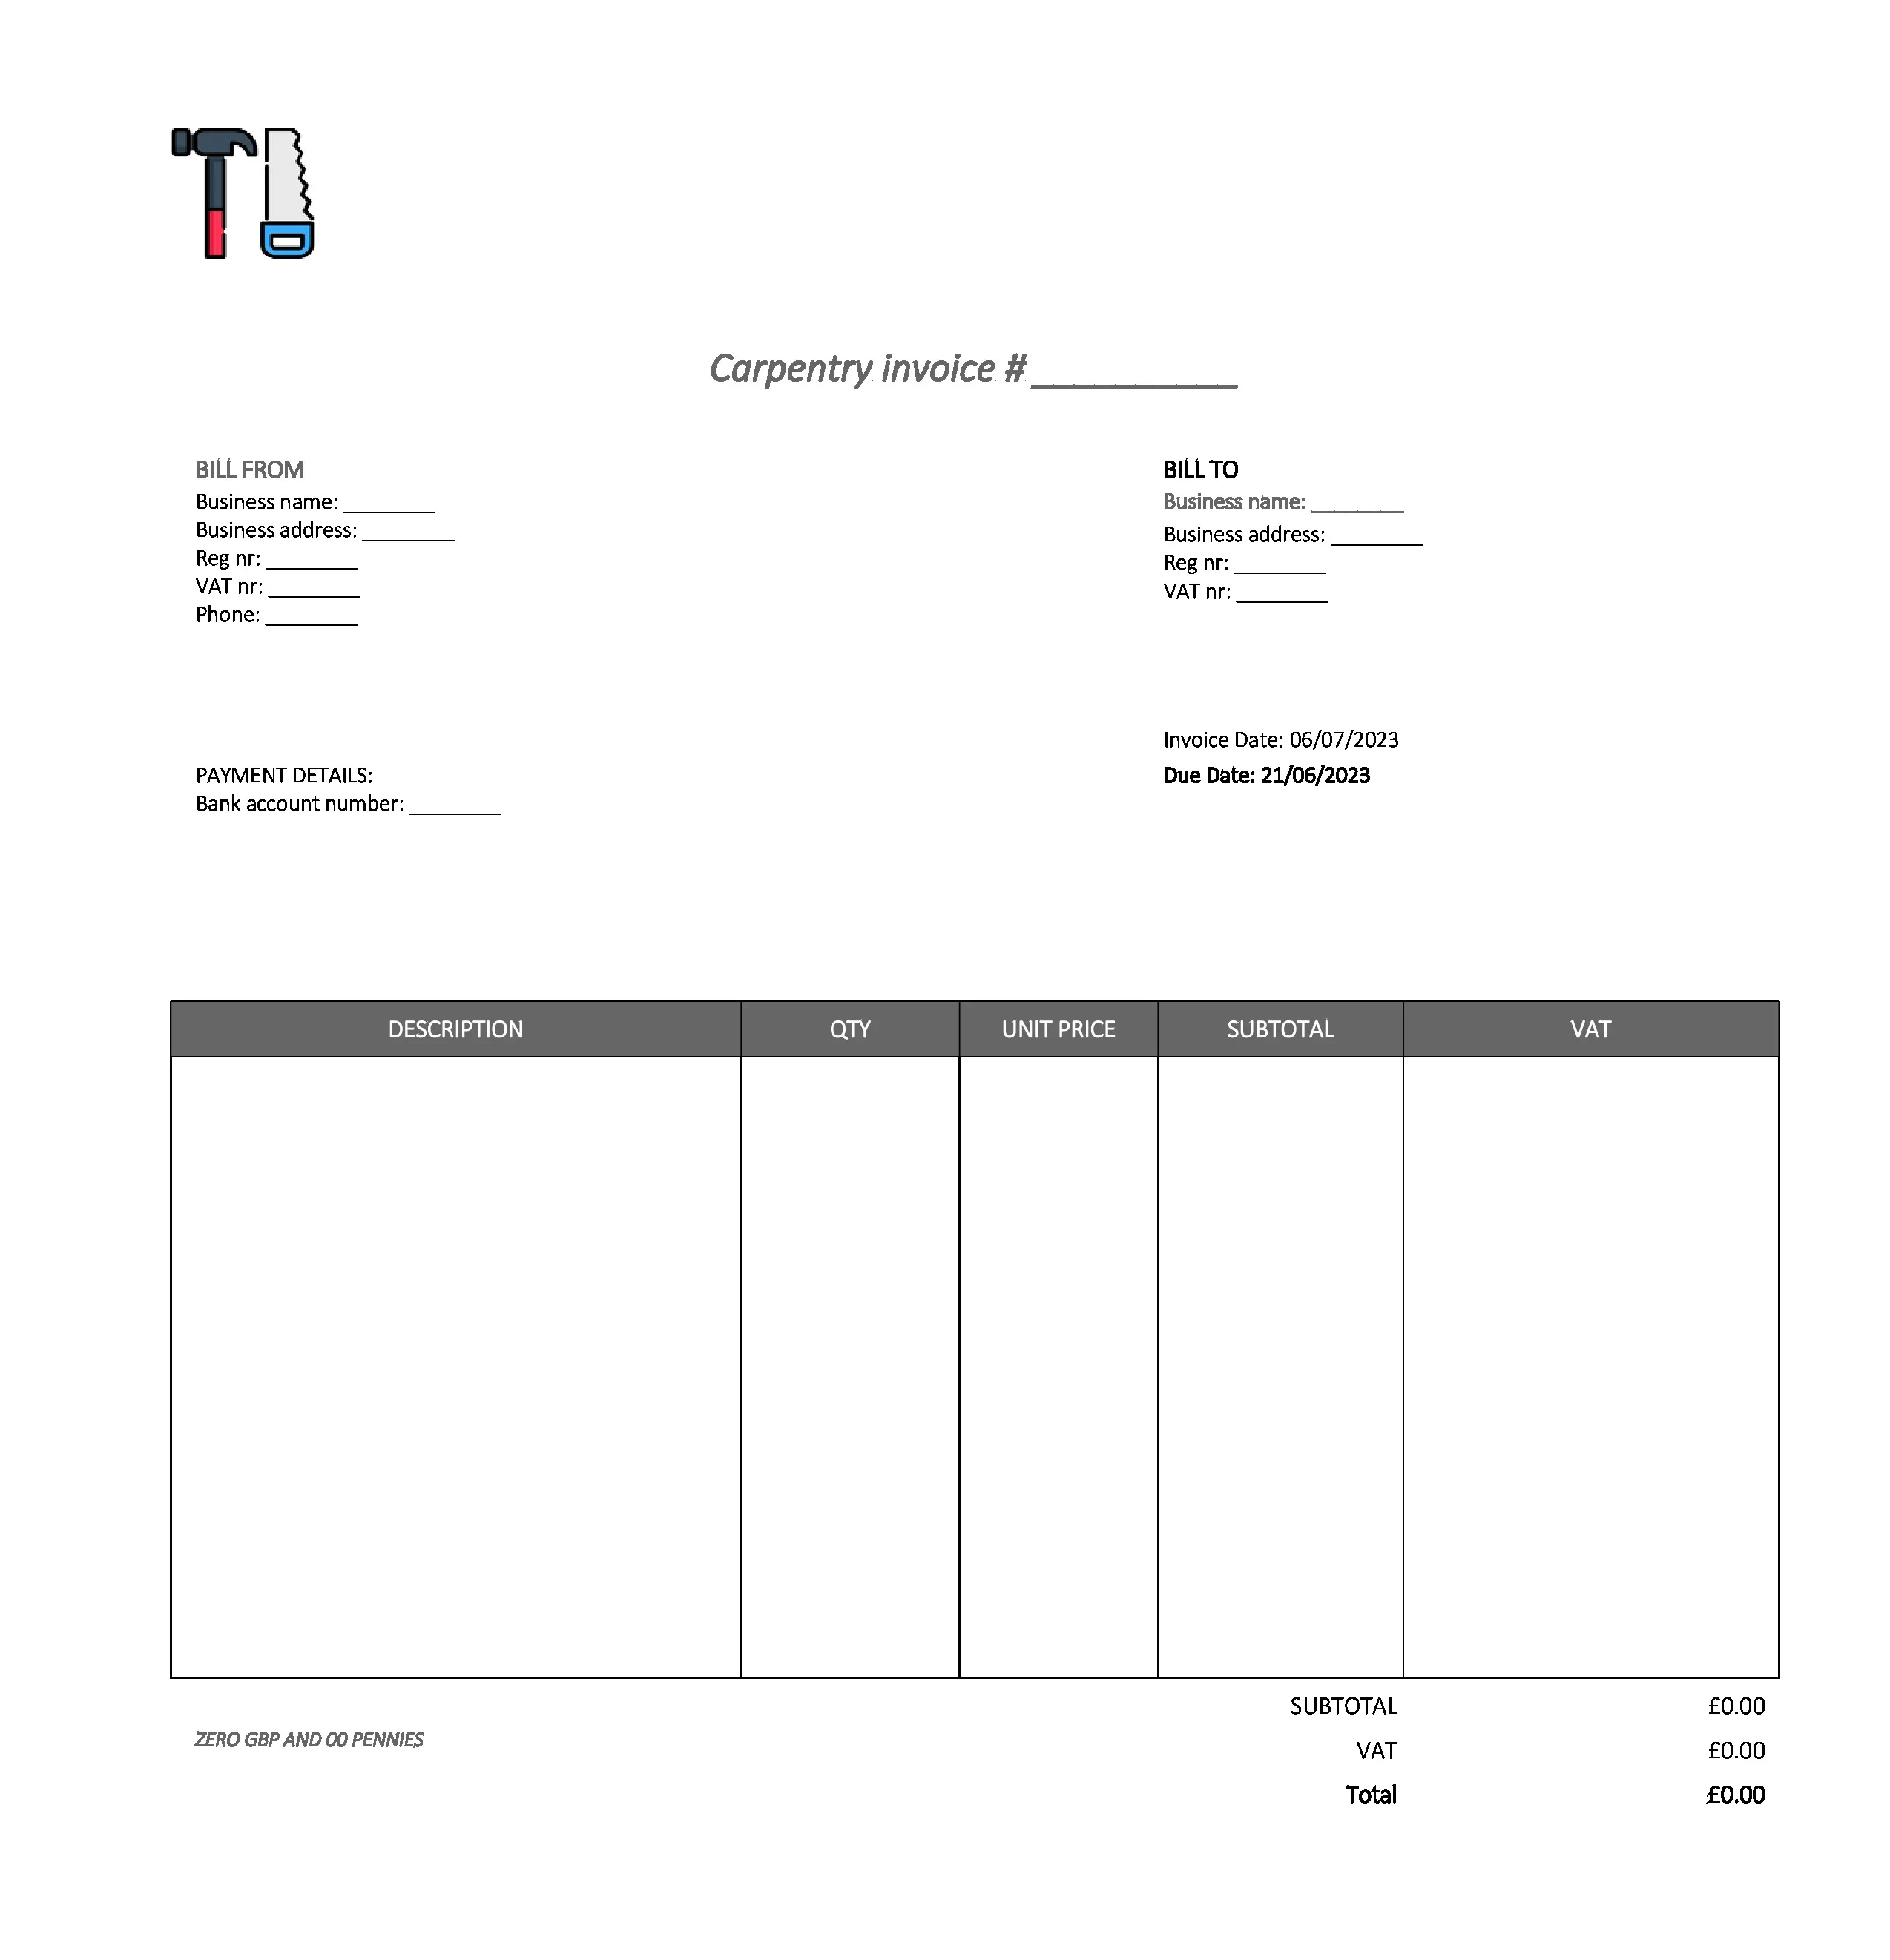 fancy carpentry invoice template UK Excel / Google sheets